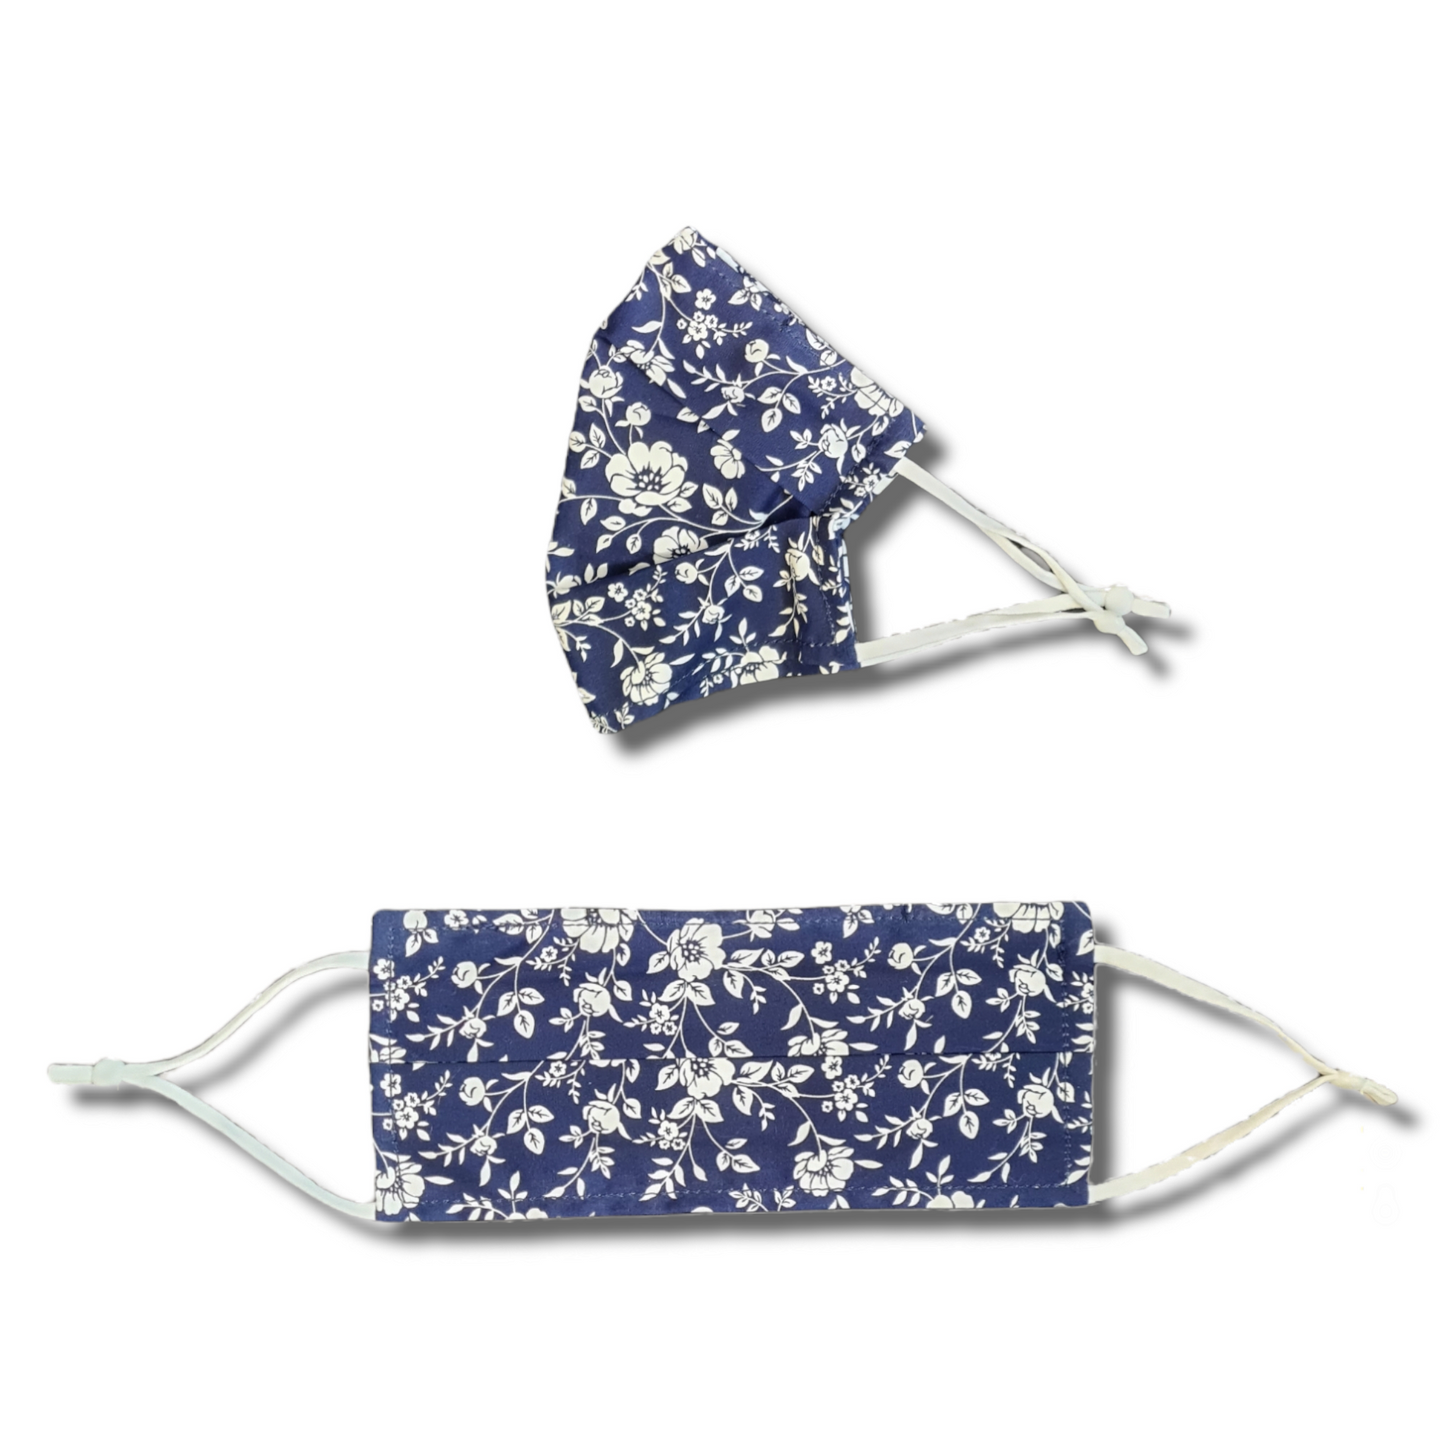 White floral and navy face mask. Washable and reusable with filter pocket. Adjustable elastic ear loops with toggle adjustment.